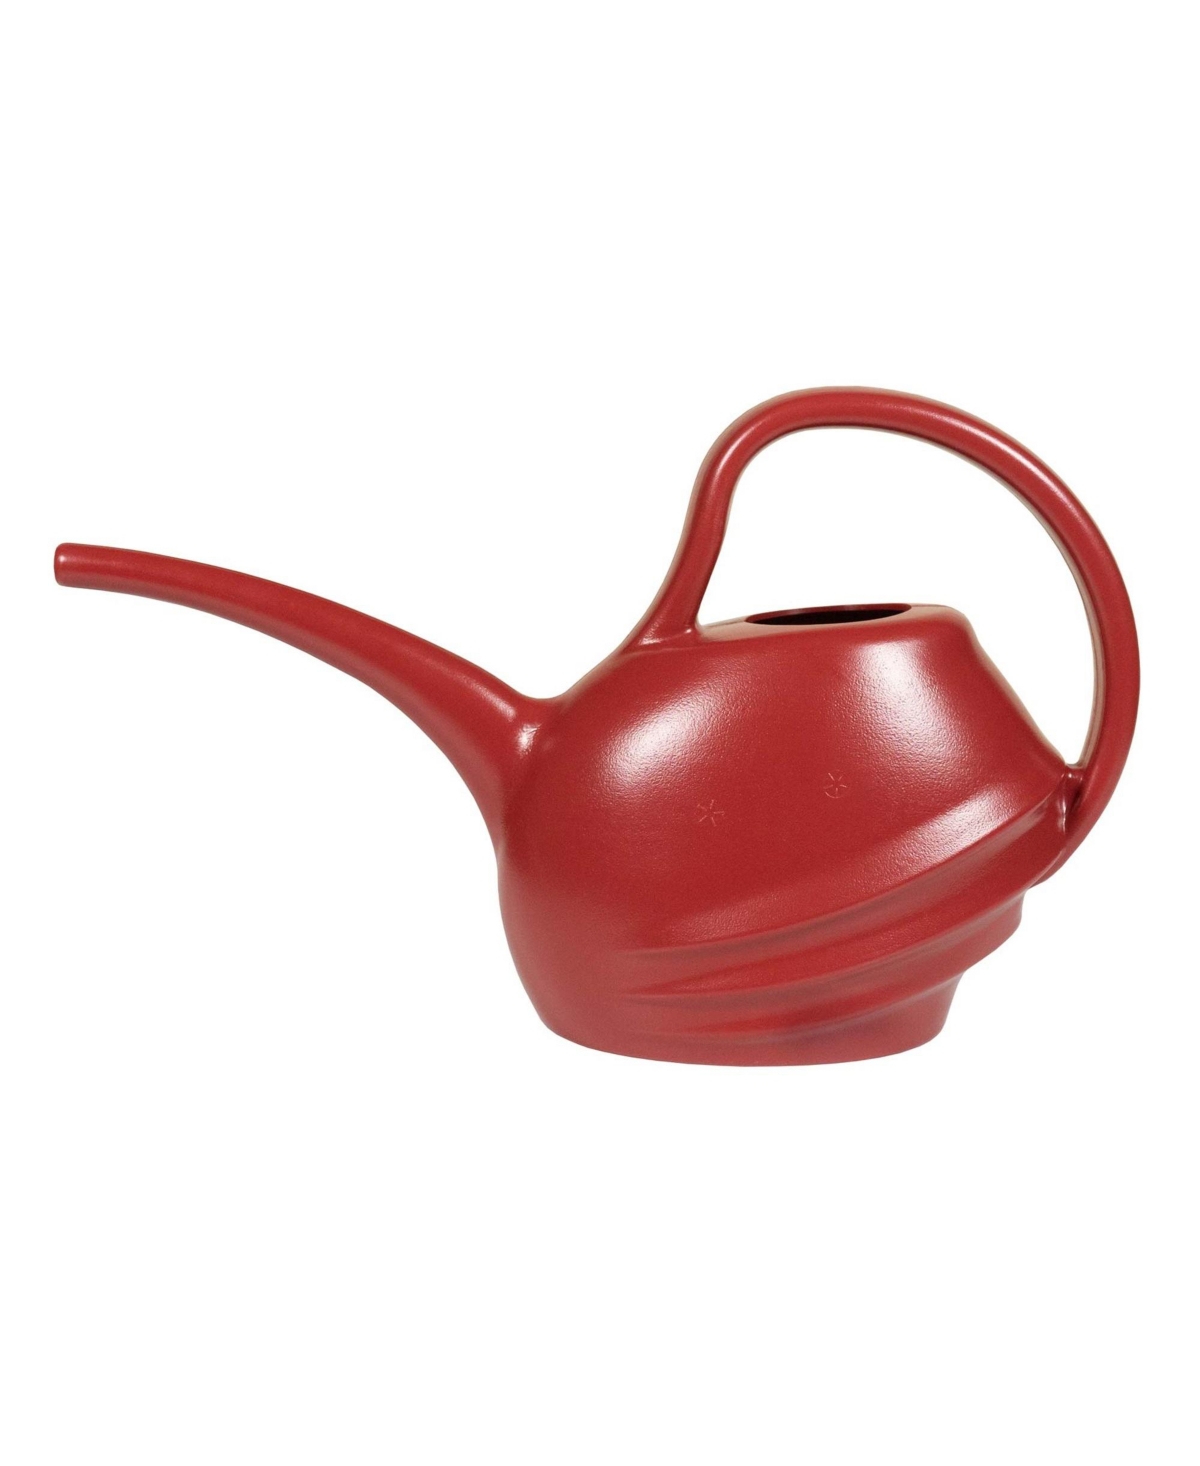 Lightweight Plastic Watering Can with Long Spout, 0.5 Gallons - Red